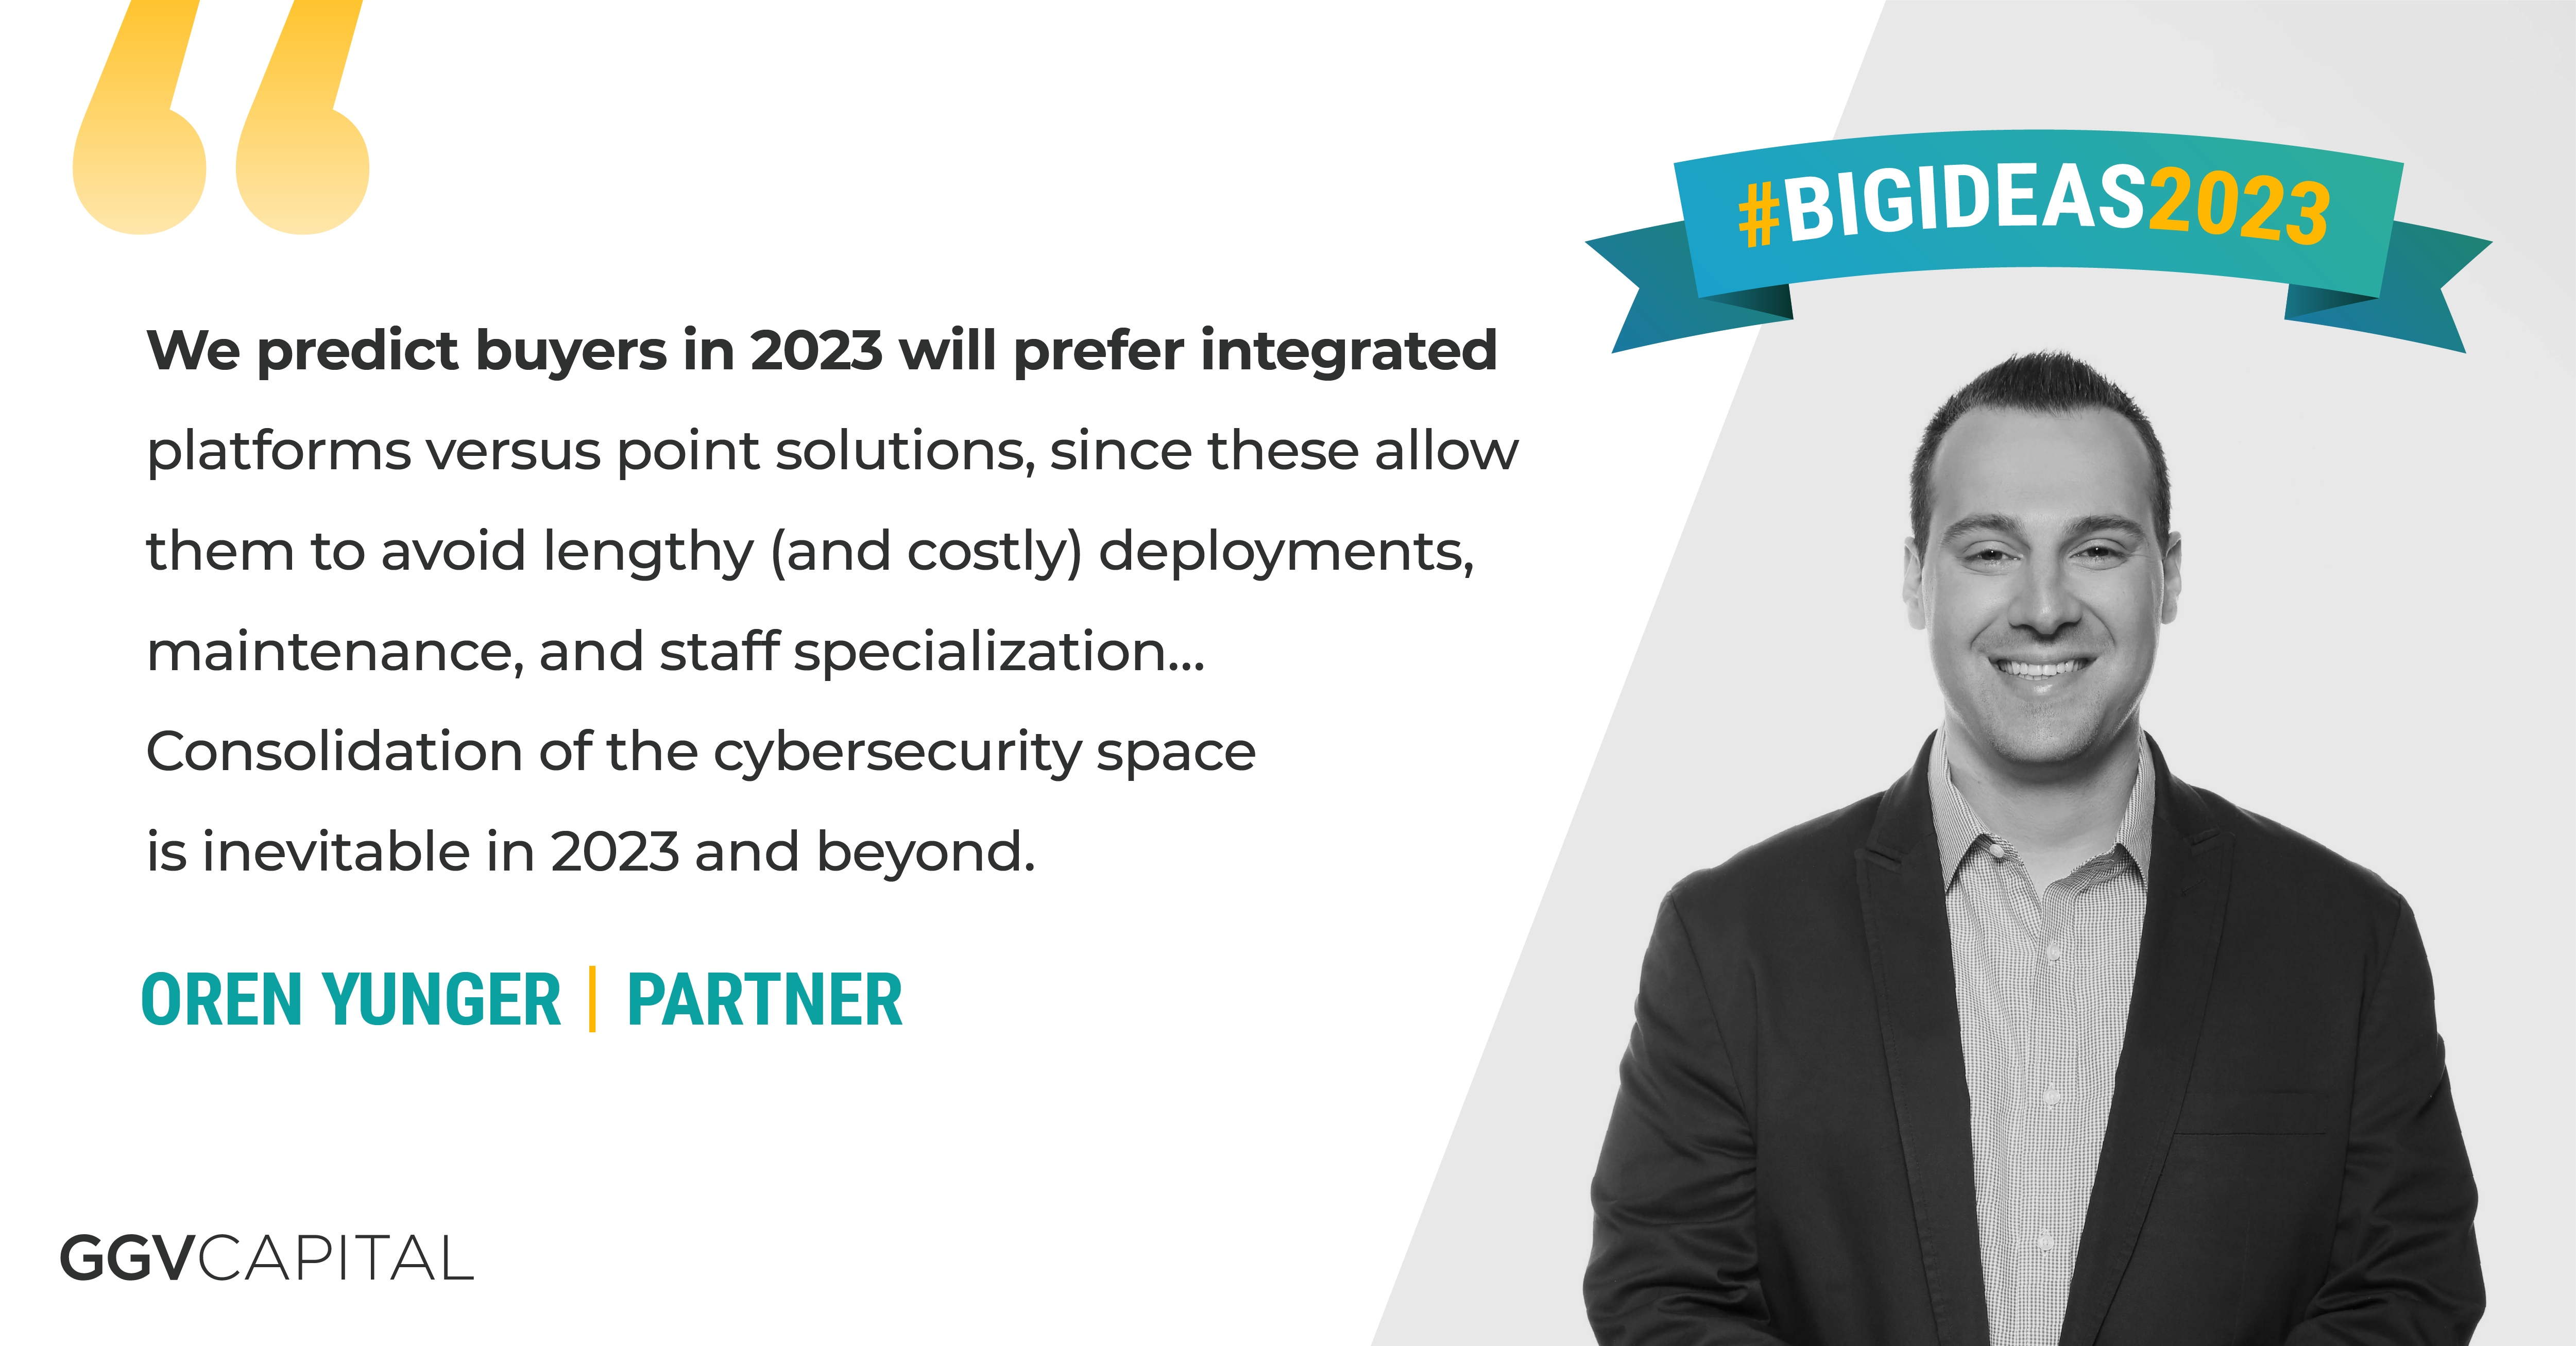 “We predict buyers in 2023 will prefer integrated platforms versus point solutions, since these allow them to avoid lengthy (and costly) deployments, maintenance, and staff specialization … Consolidation of the cybersecurity space is inevitable in 2023 and beyond.” —Oren Yunger, Partner at GGV Capital